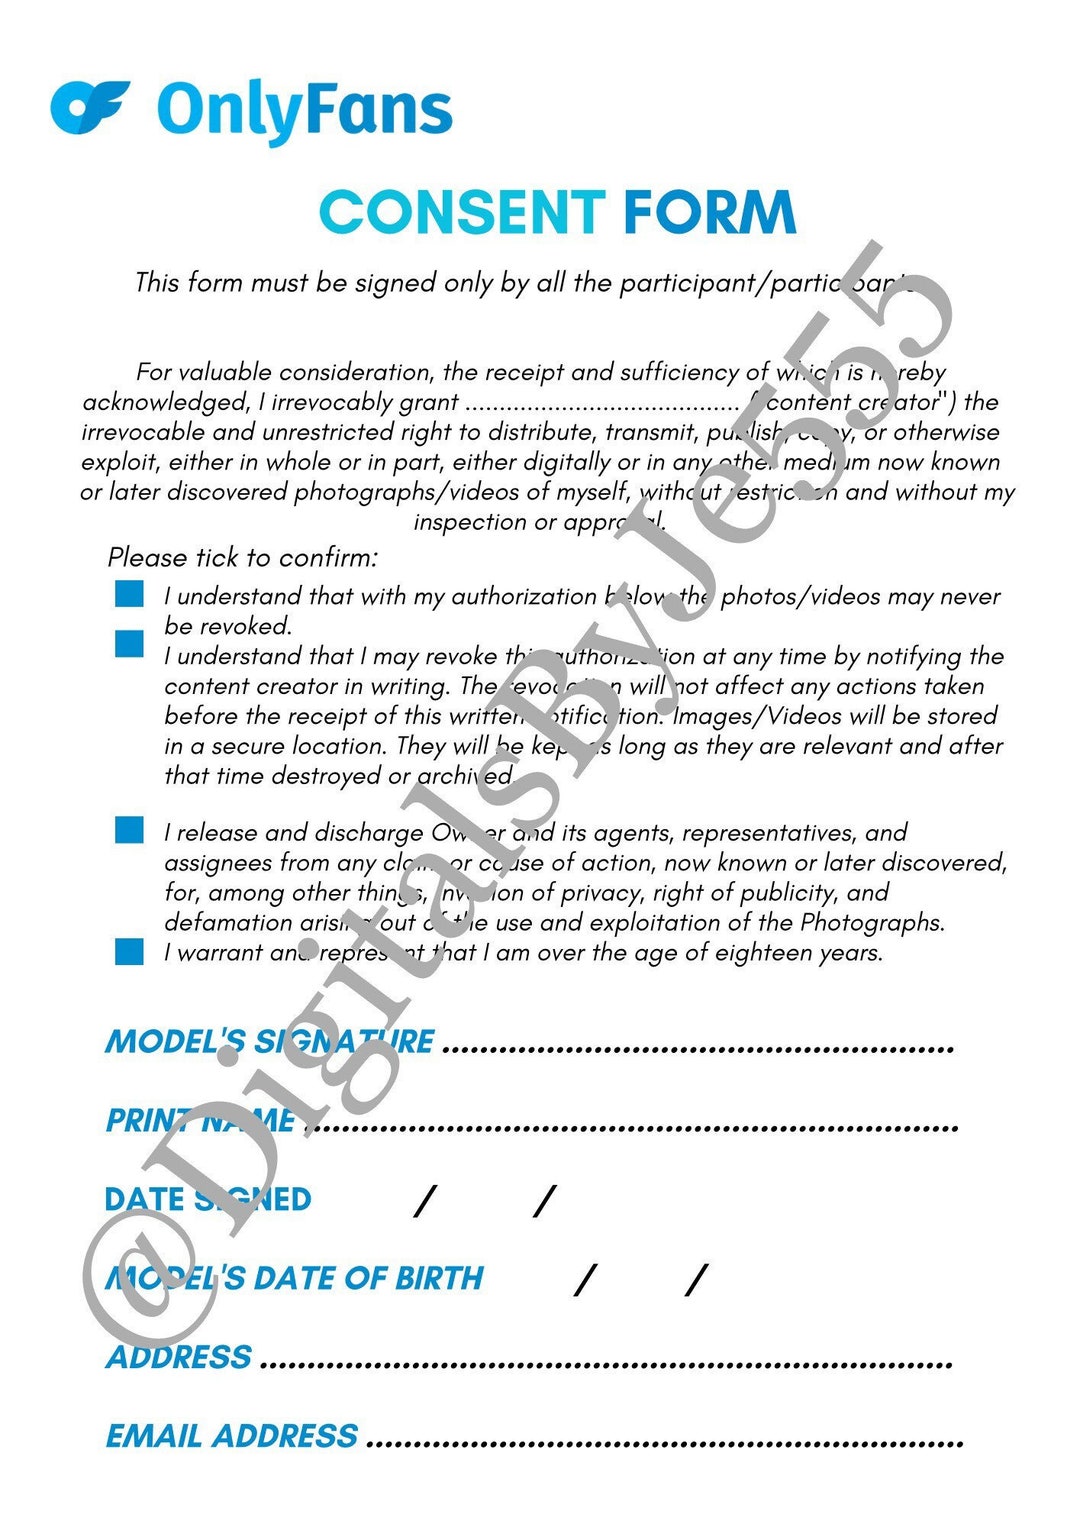 onlyfans-consent-form-digital-download-template-etsy-finland